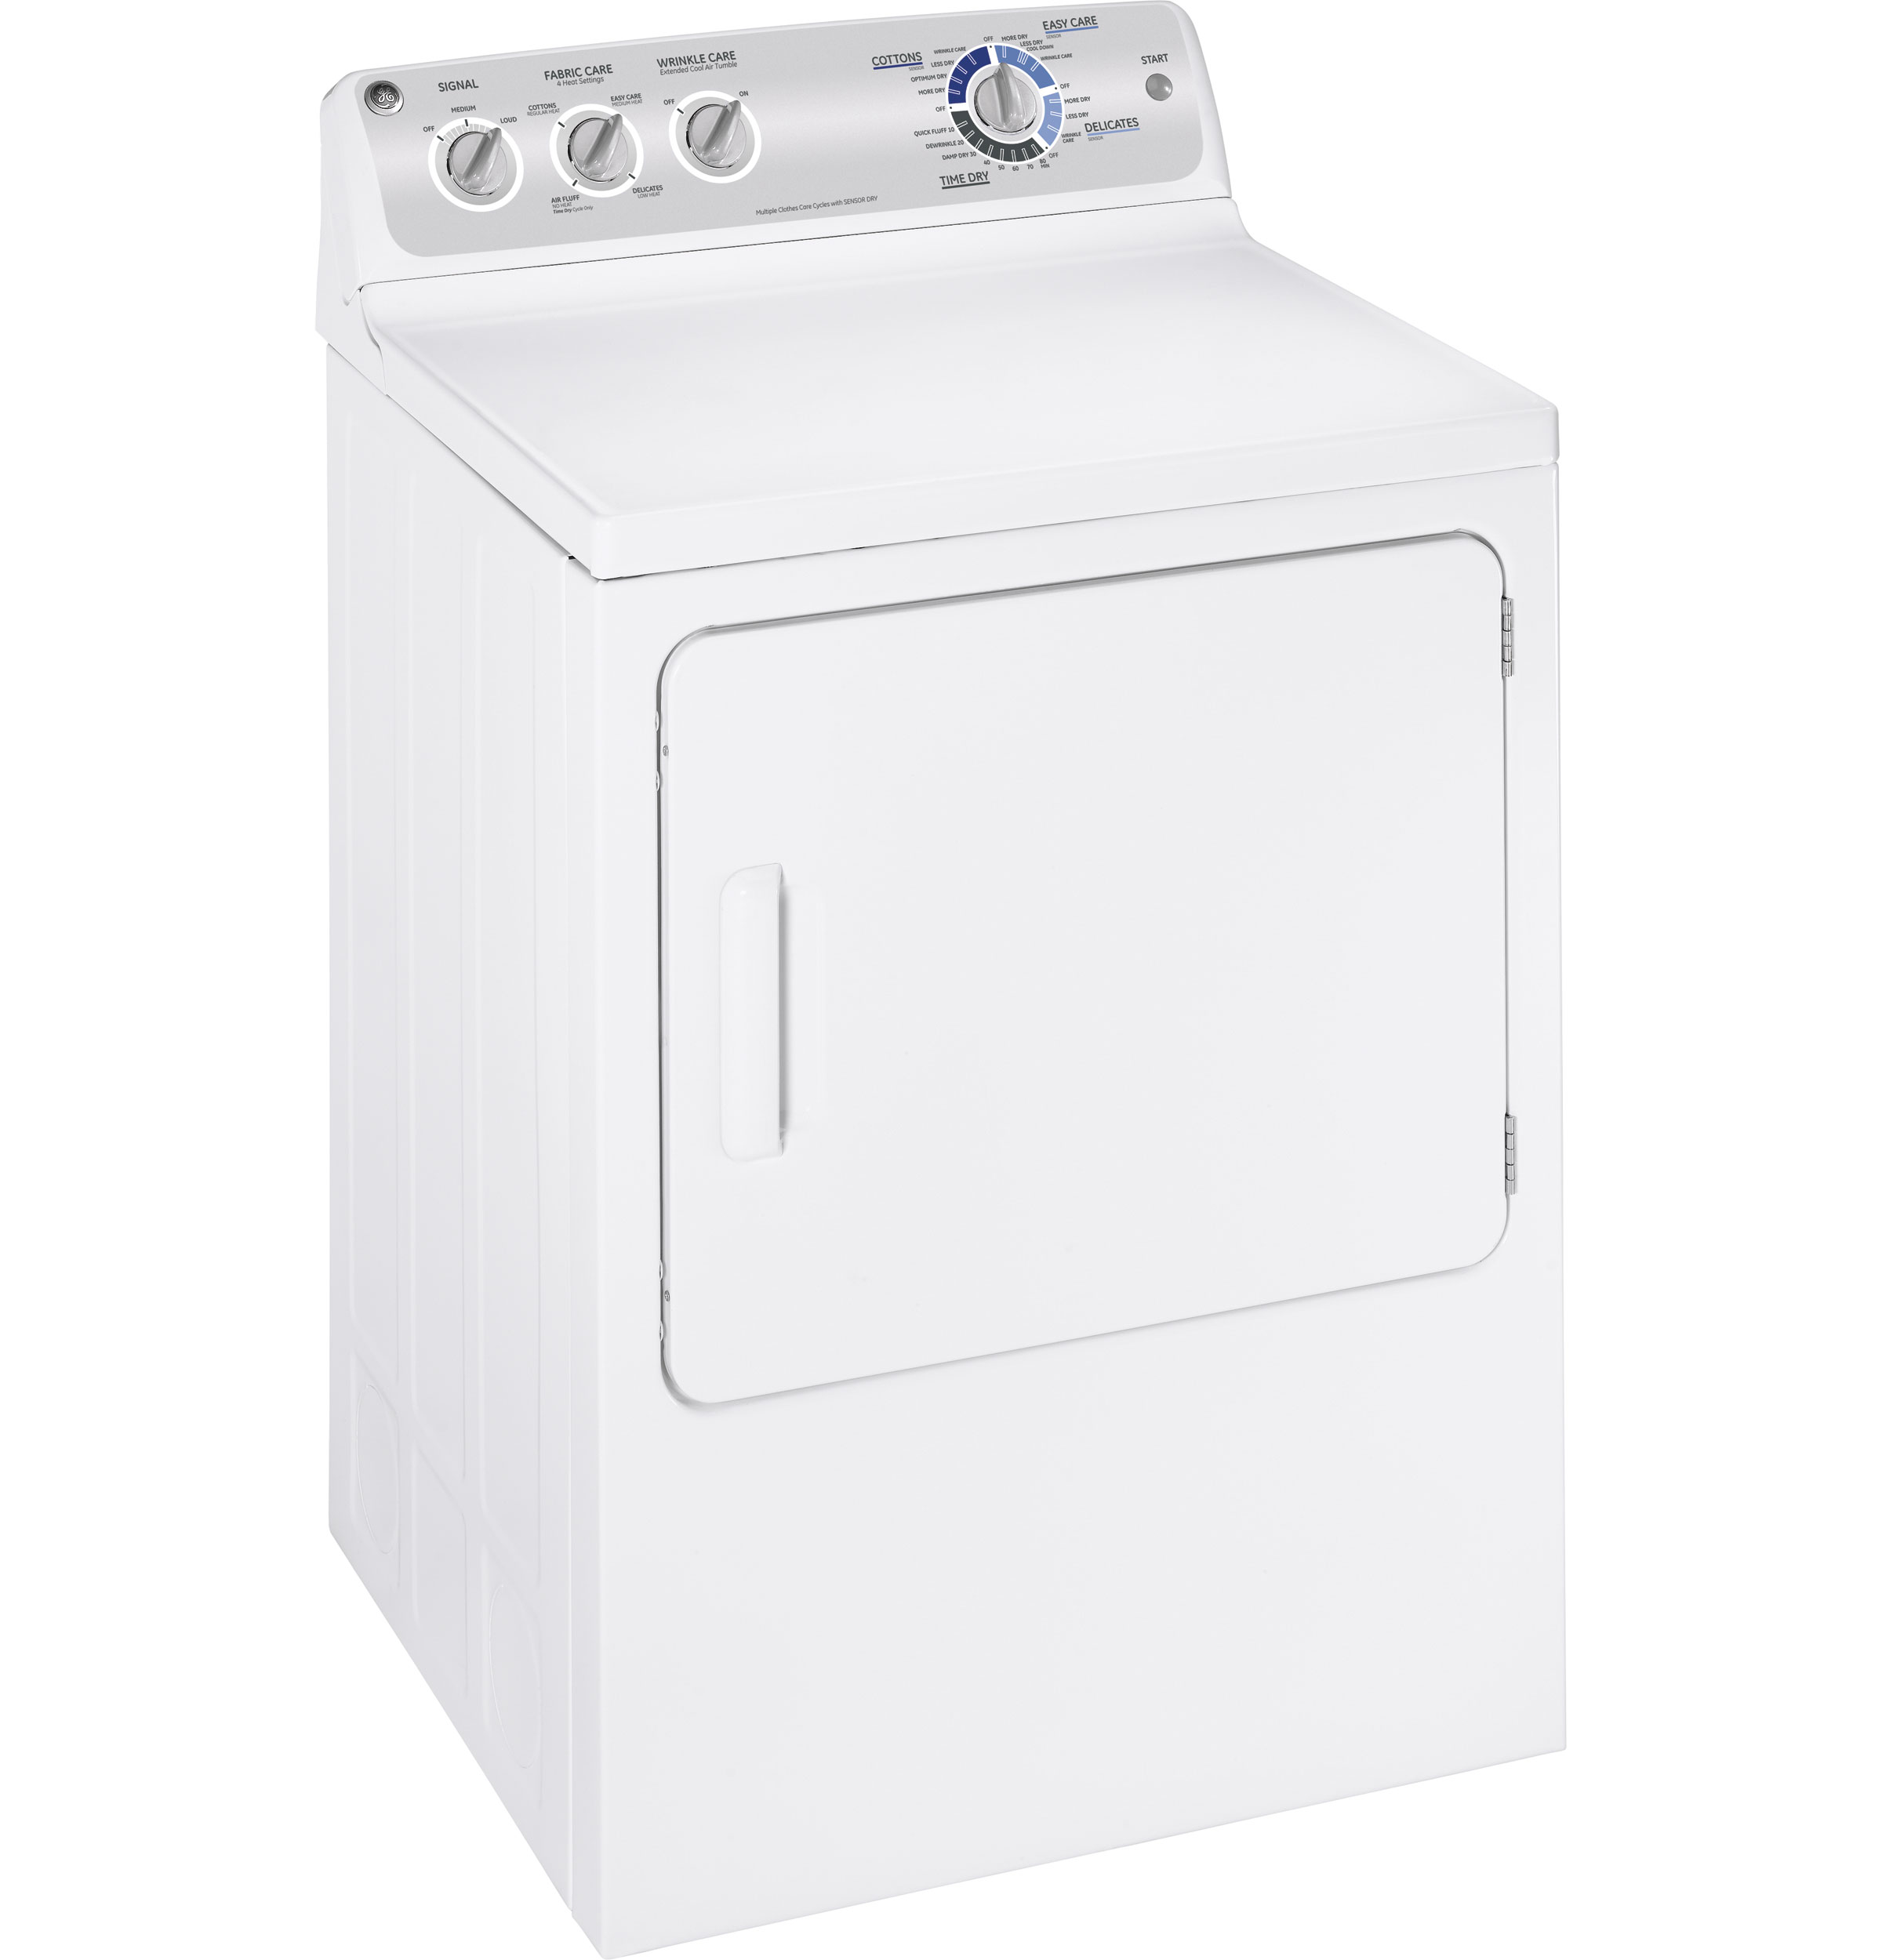 GE® 7.0 cu. ft. stainless steel capacity electric dryer with Sensor Dry™